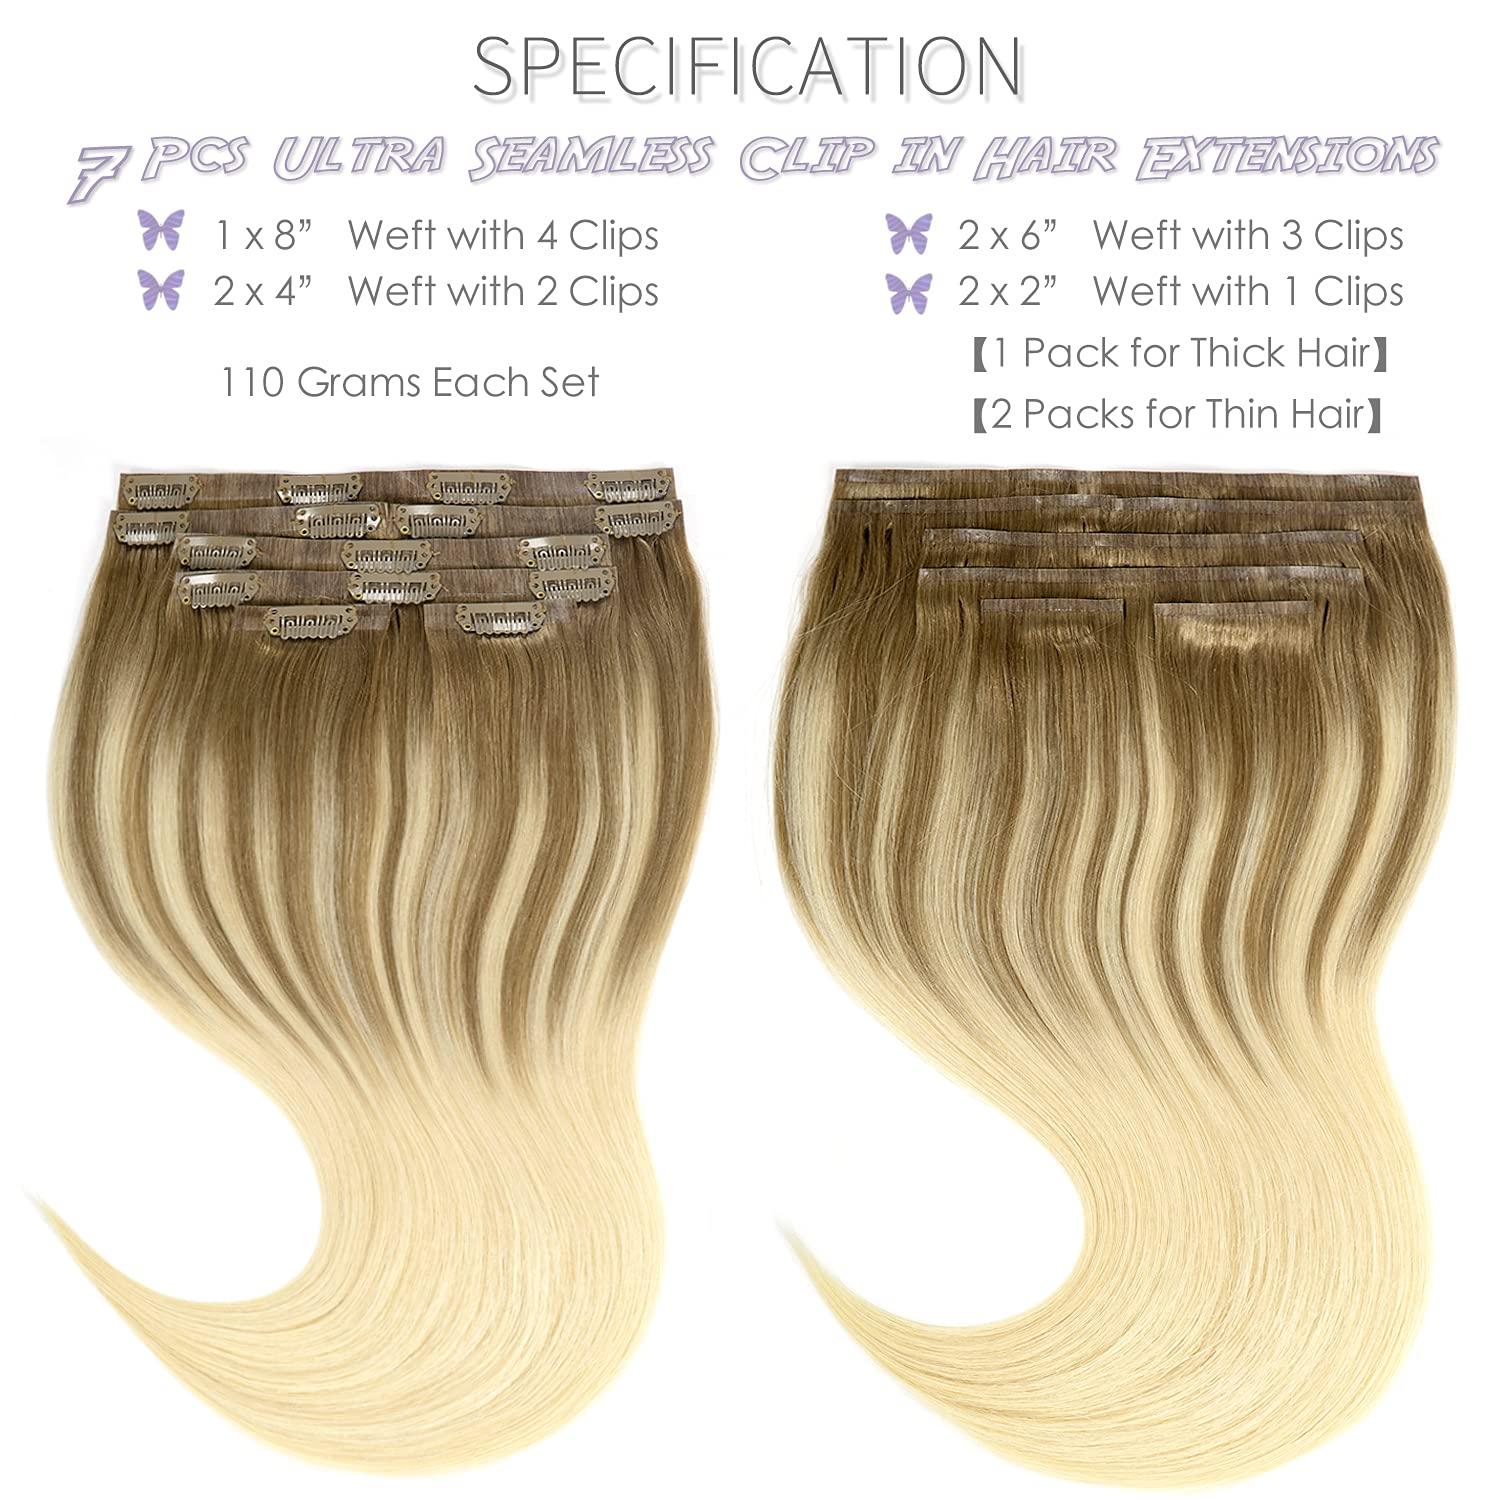 Lacer Ultra Thin Weft Seamless Hair Extensions Clip in Human Hair Double PU  Skin Weft Light Brown Fading to Platinum Blonde 100% Human Hair Clip in  Hair Extensions 7pcs 110g with 16